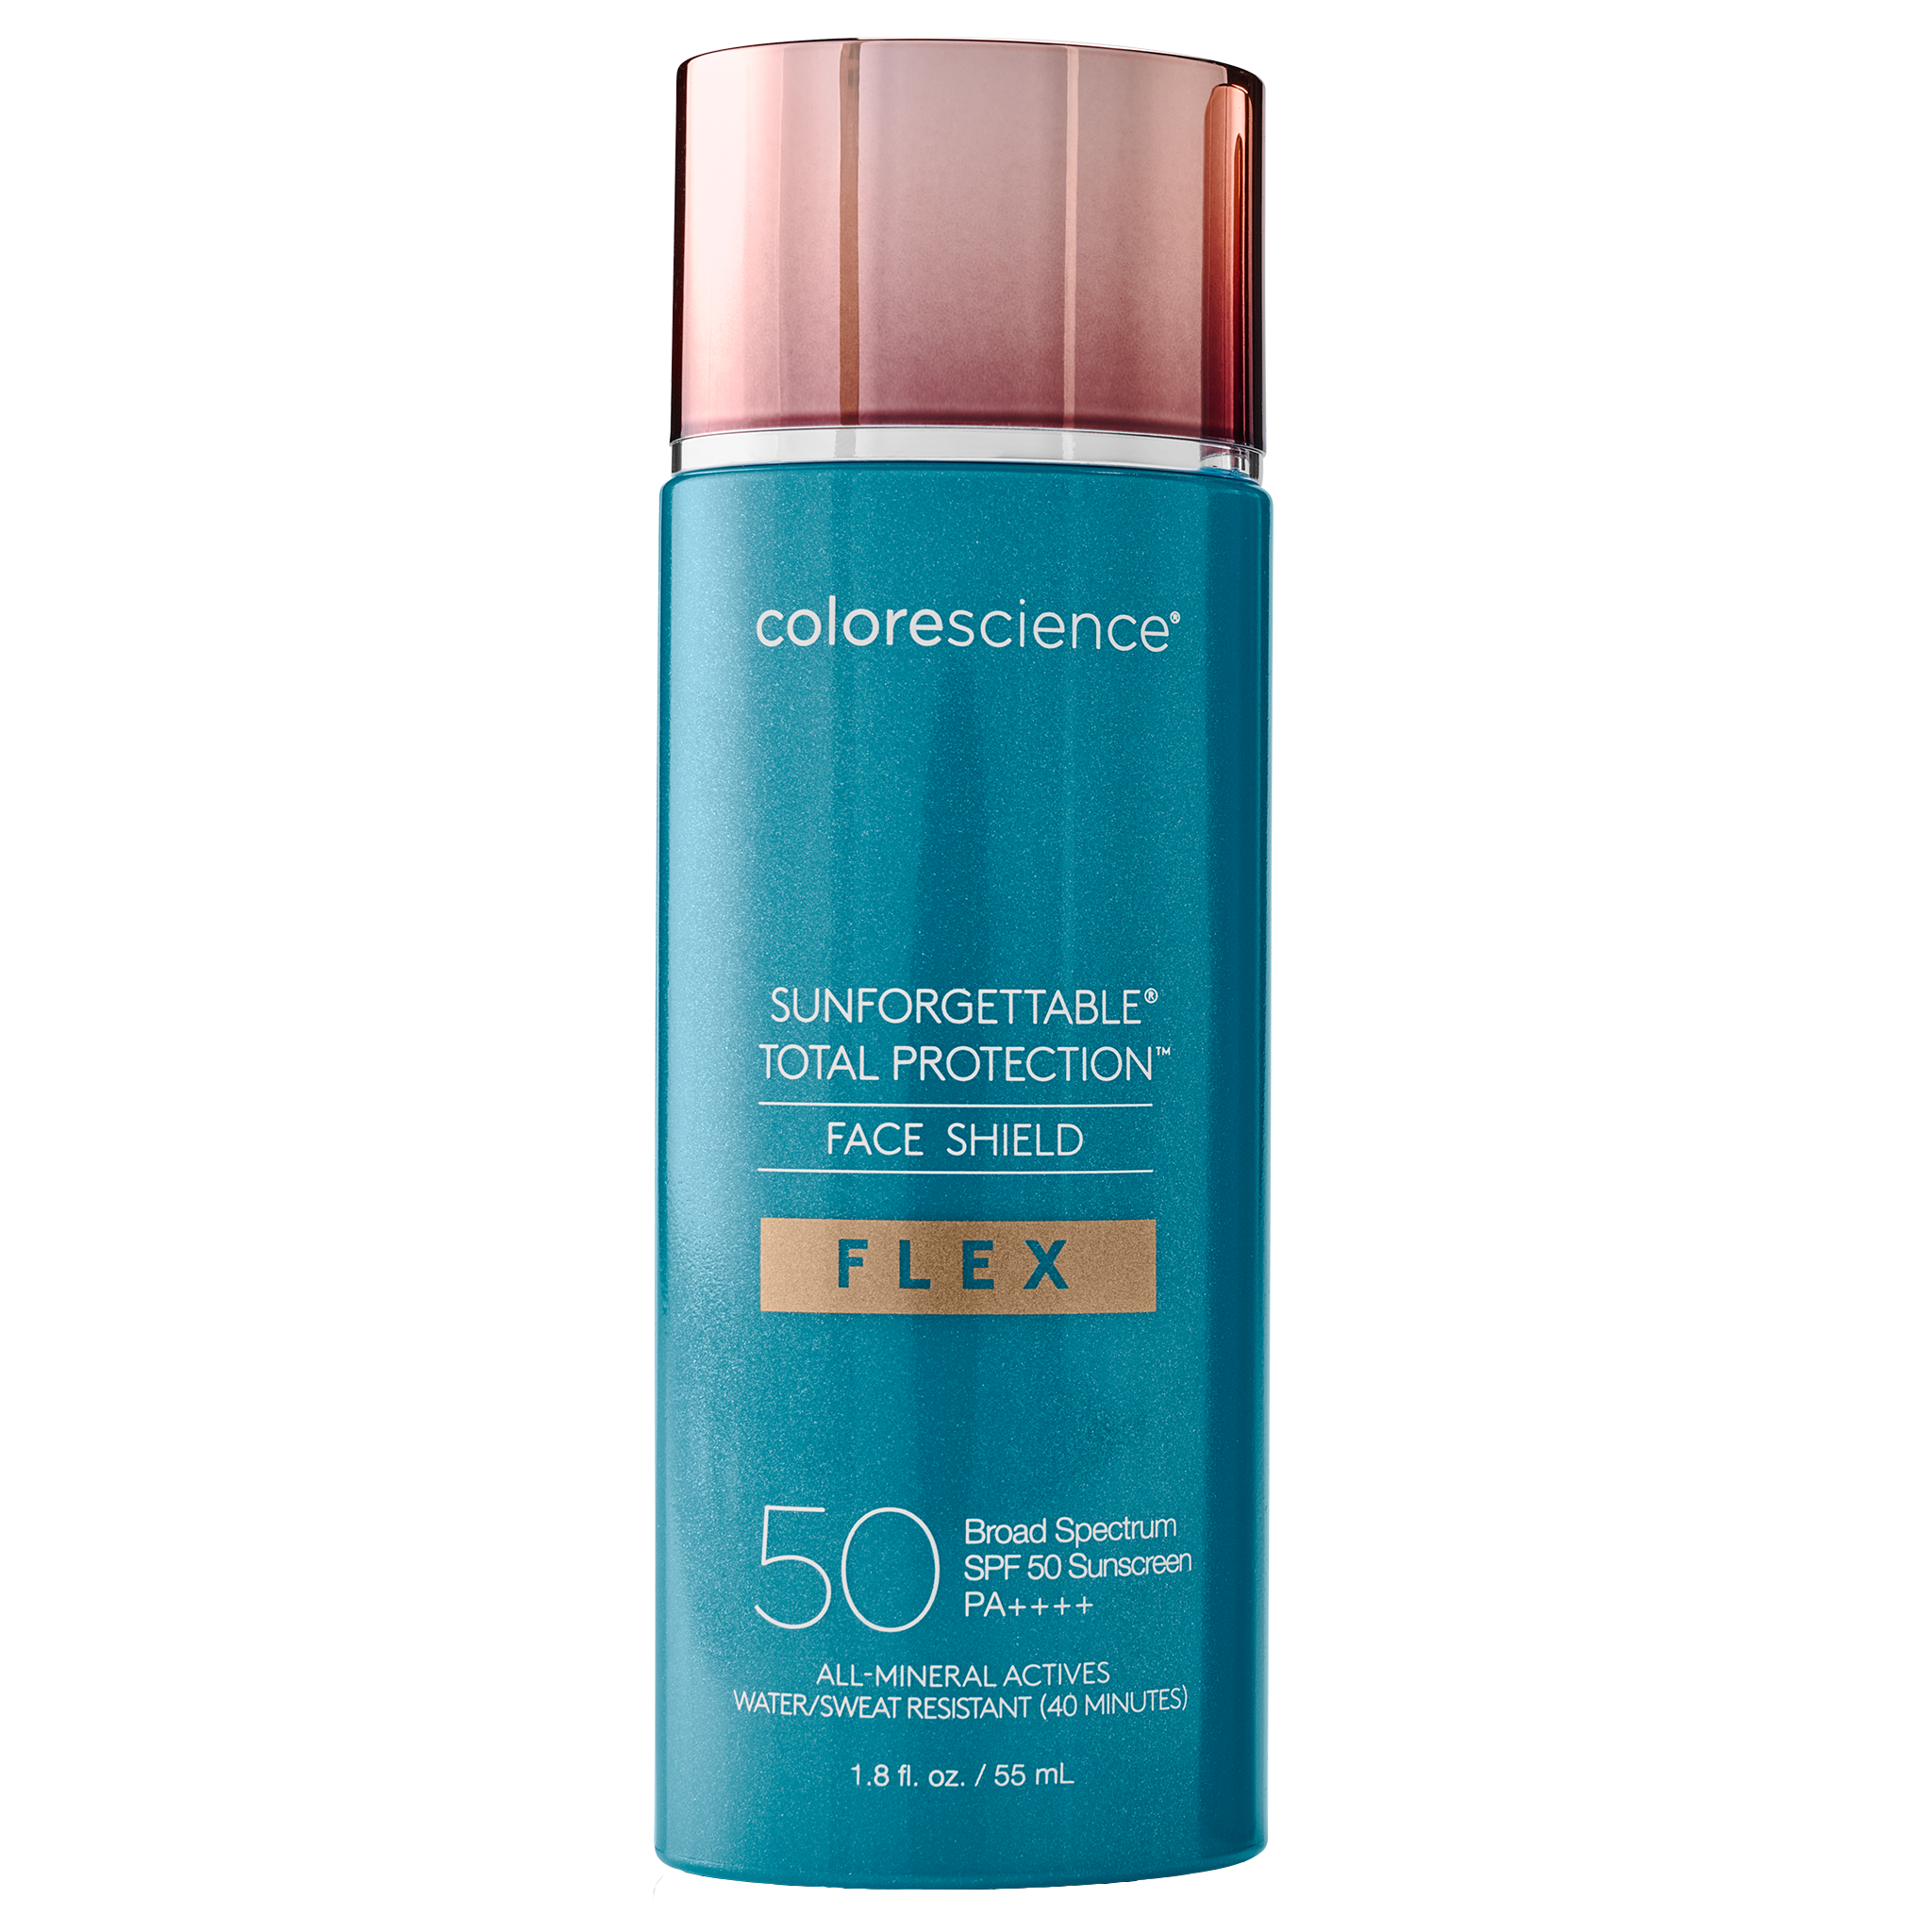 Sunforgettable® Total Protection™ Face Shield Flex SPF 50 || all